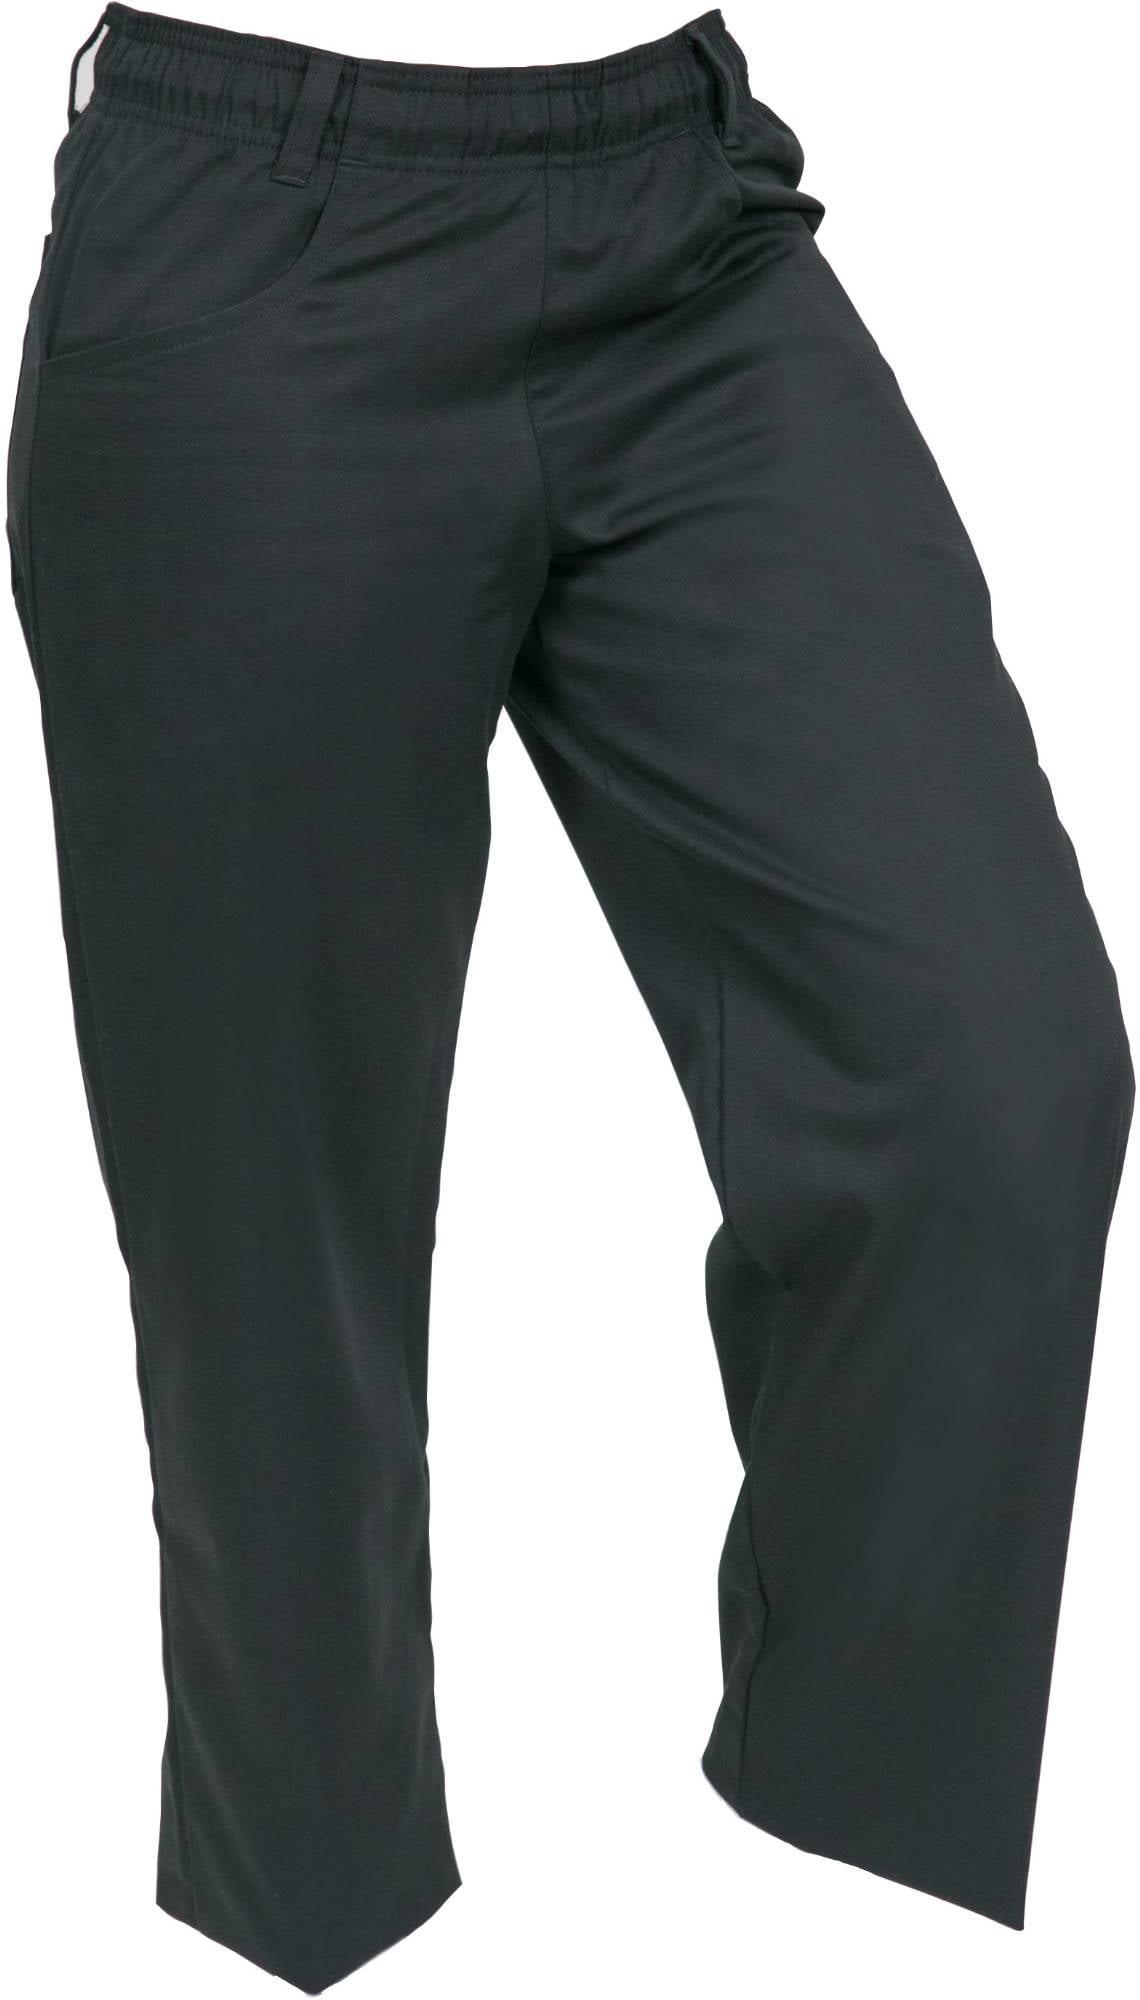 Black/White Medium Mercer Culinary M61071HTM Genesis Womens Chef Cargo Pant in Hounds Tooth 